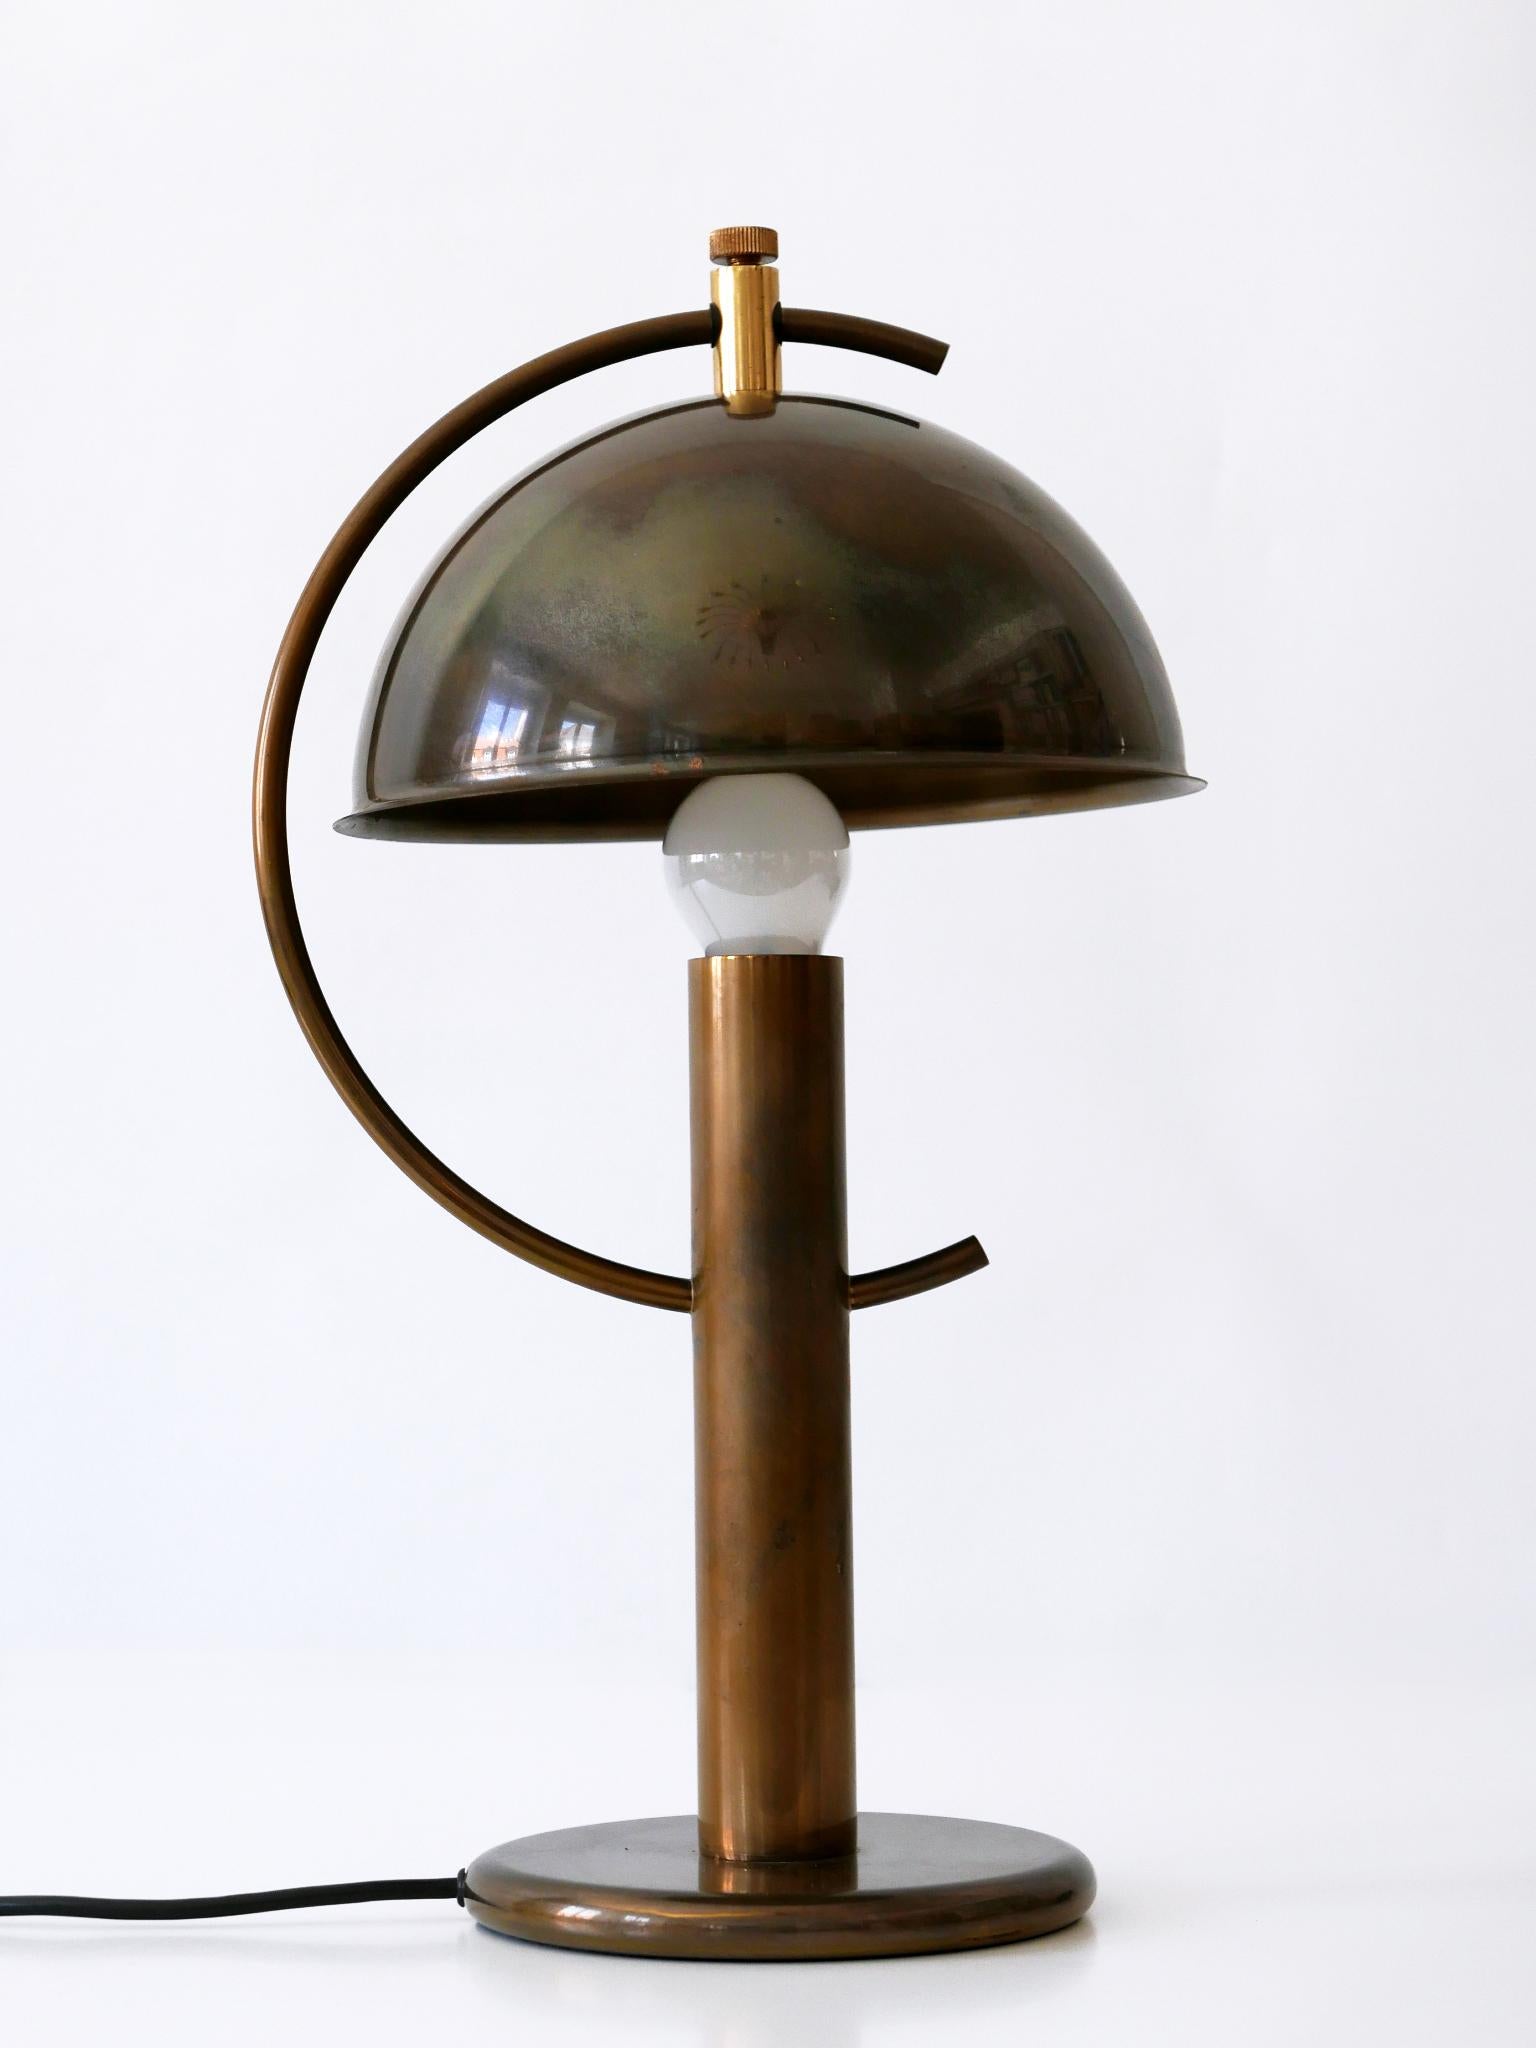 Exceptional and elegant Mid-Century Modern brass table lamp with adjustable lamp shade. Designed and manufactured by Florian Schulz, Germany, 1970s.

Executed in massive brass sheet and tube, the lamp comes with 1 x E27 / E26 Edison screw fit bulb